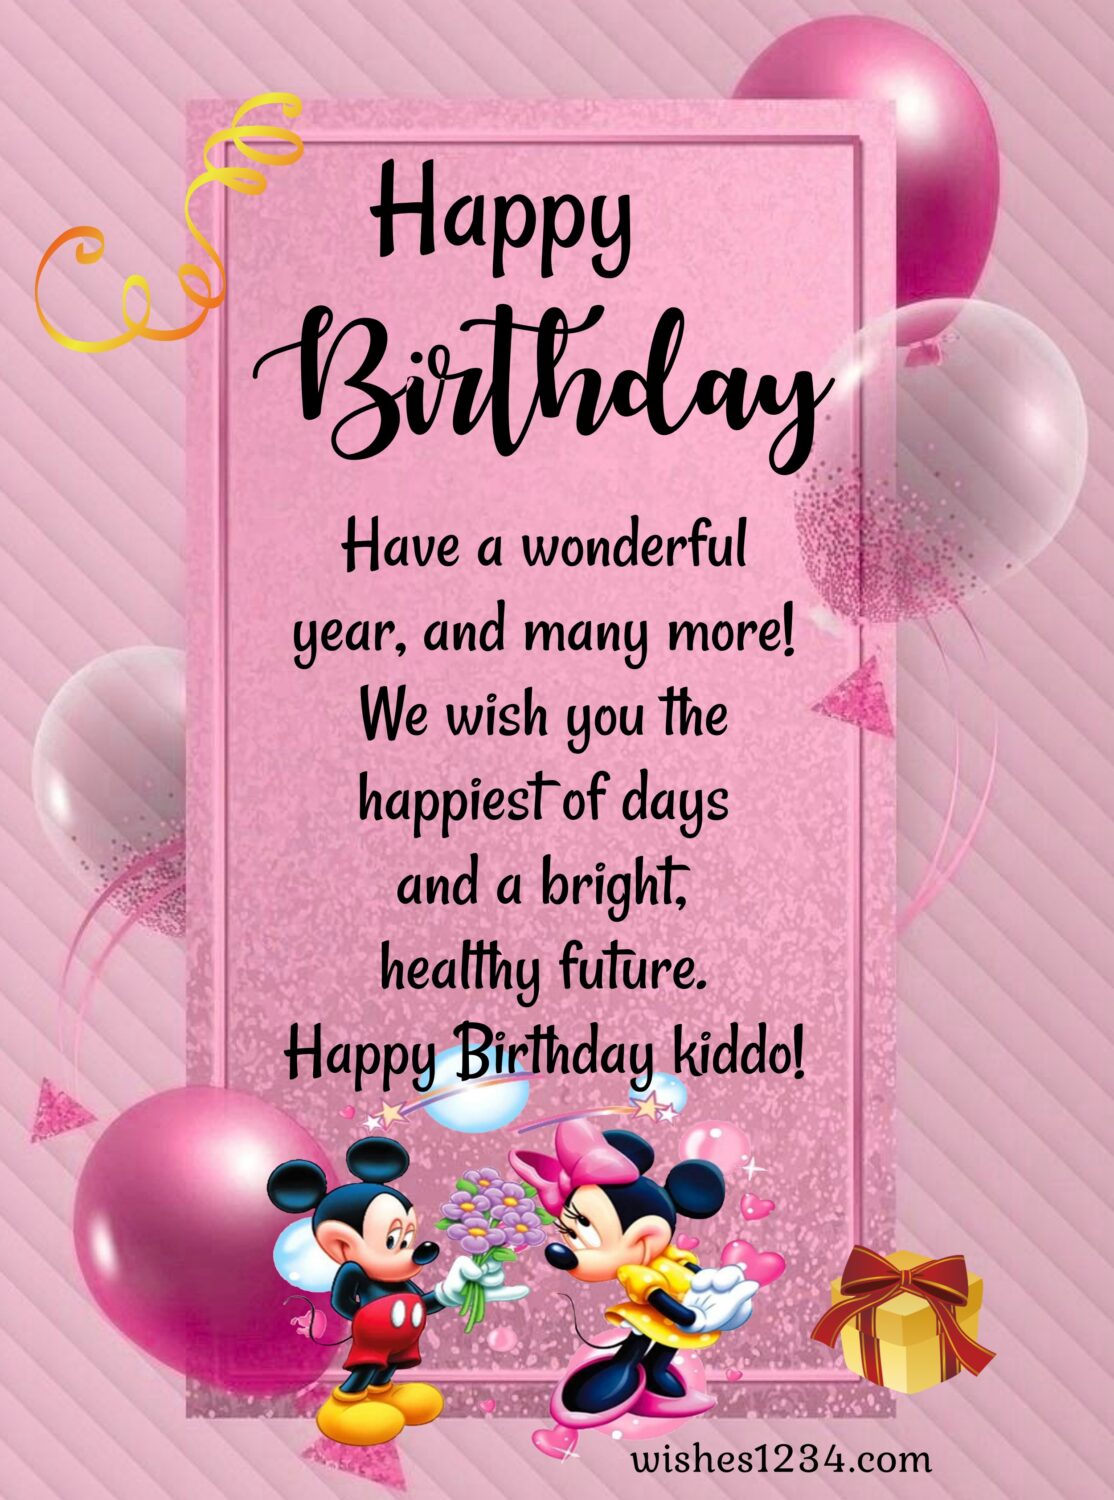 Birthday posterwith Mickey & Minnie mouse, Birthday wishes for kids.